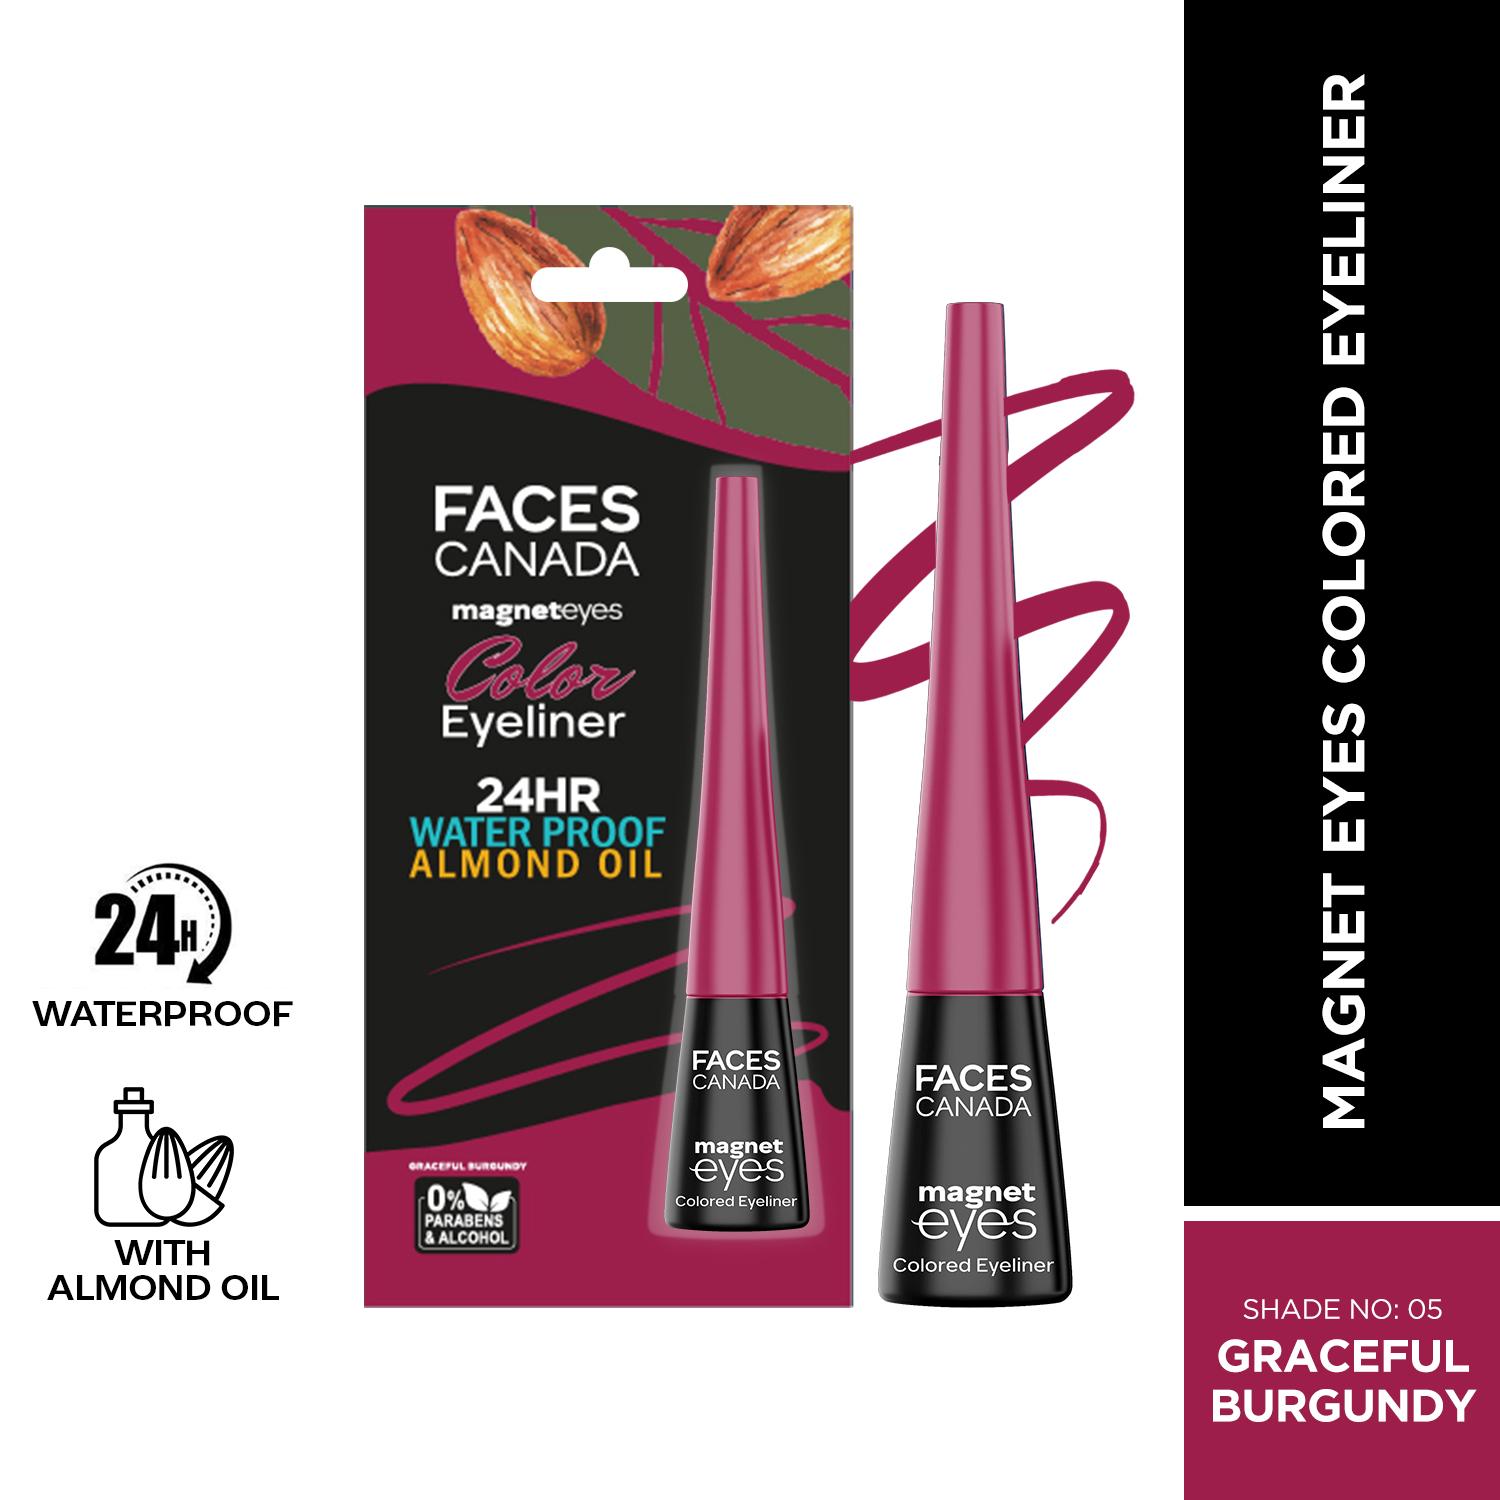 Faces Canada | Faces Canada Magneteyes Color Eyeliner, Glossy Finish, 24HR Long-lasting - Graceful Burgundy (4 ml)